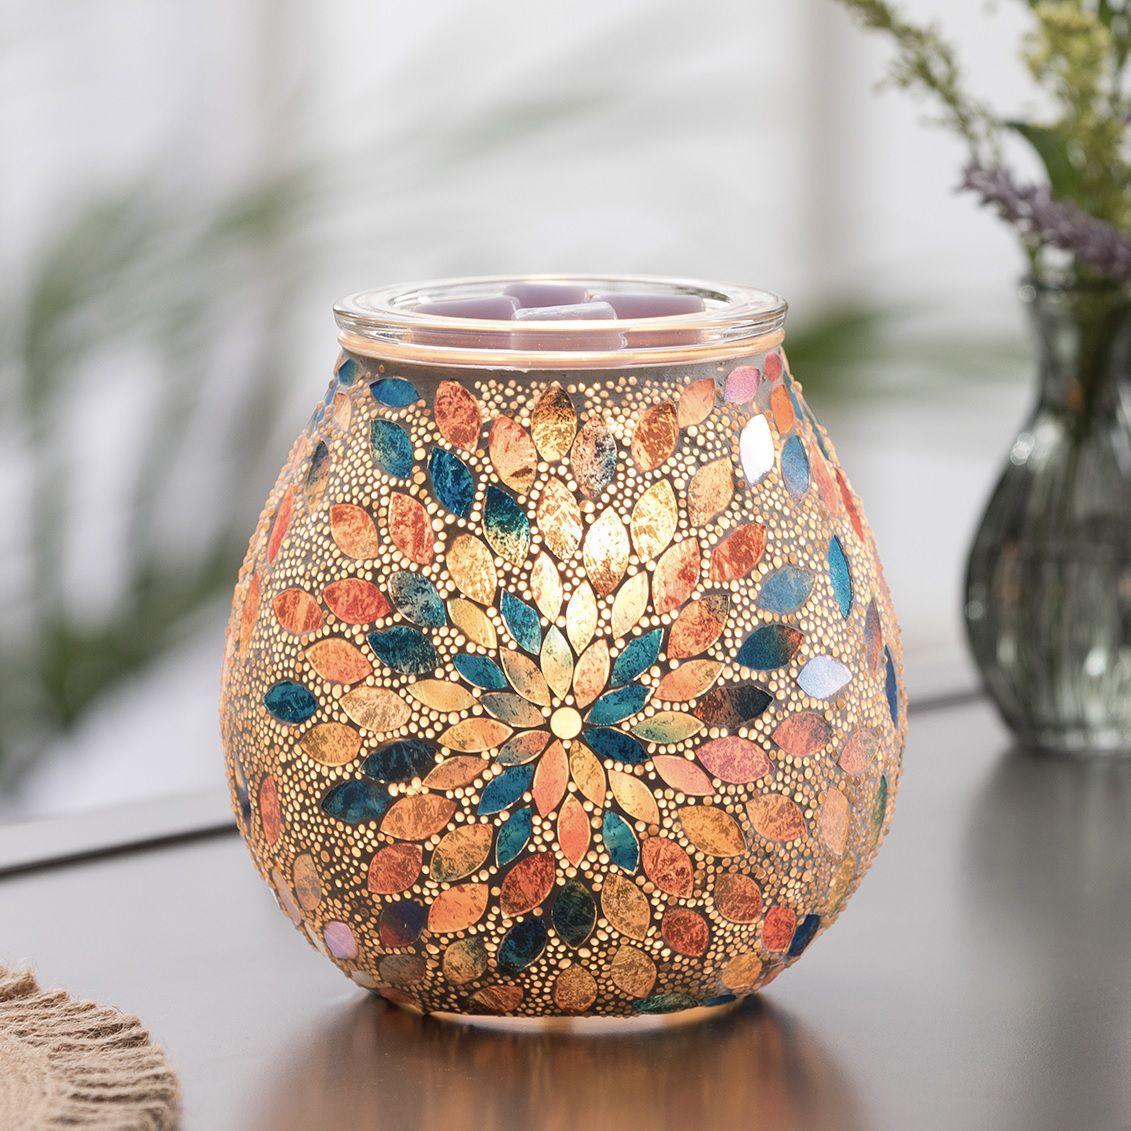 Pearlescent Petals Scentsy Warmer On Front